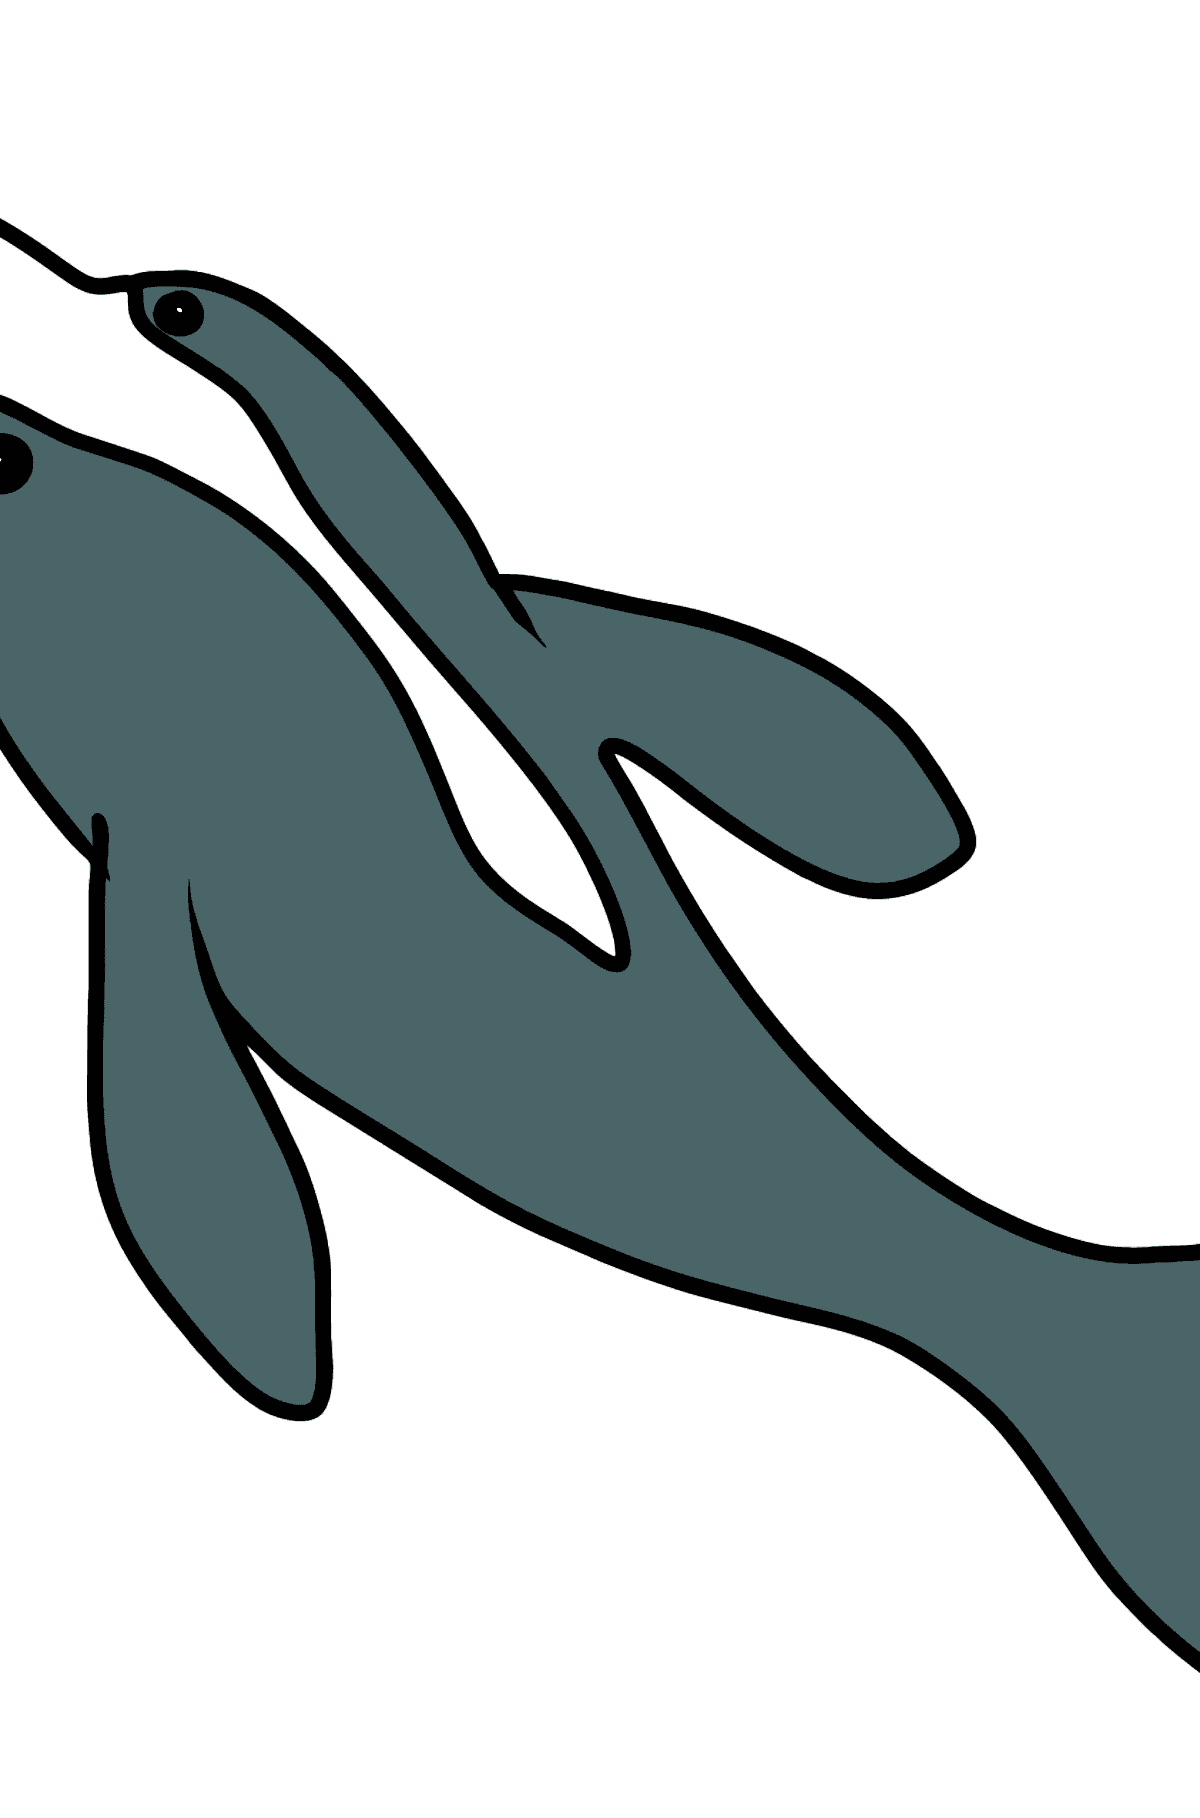 Dolphin coloring page - Coloring Pages for Kids